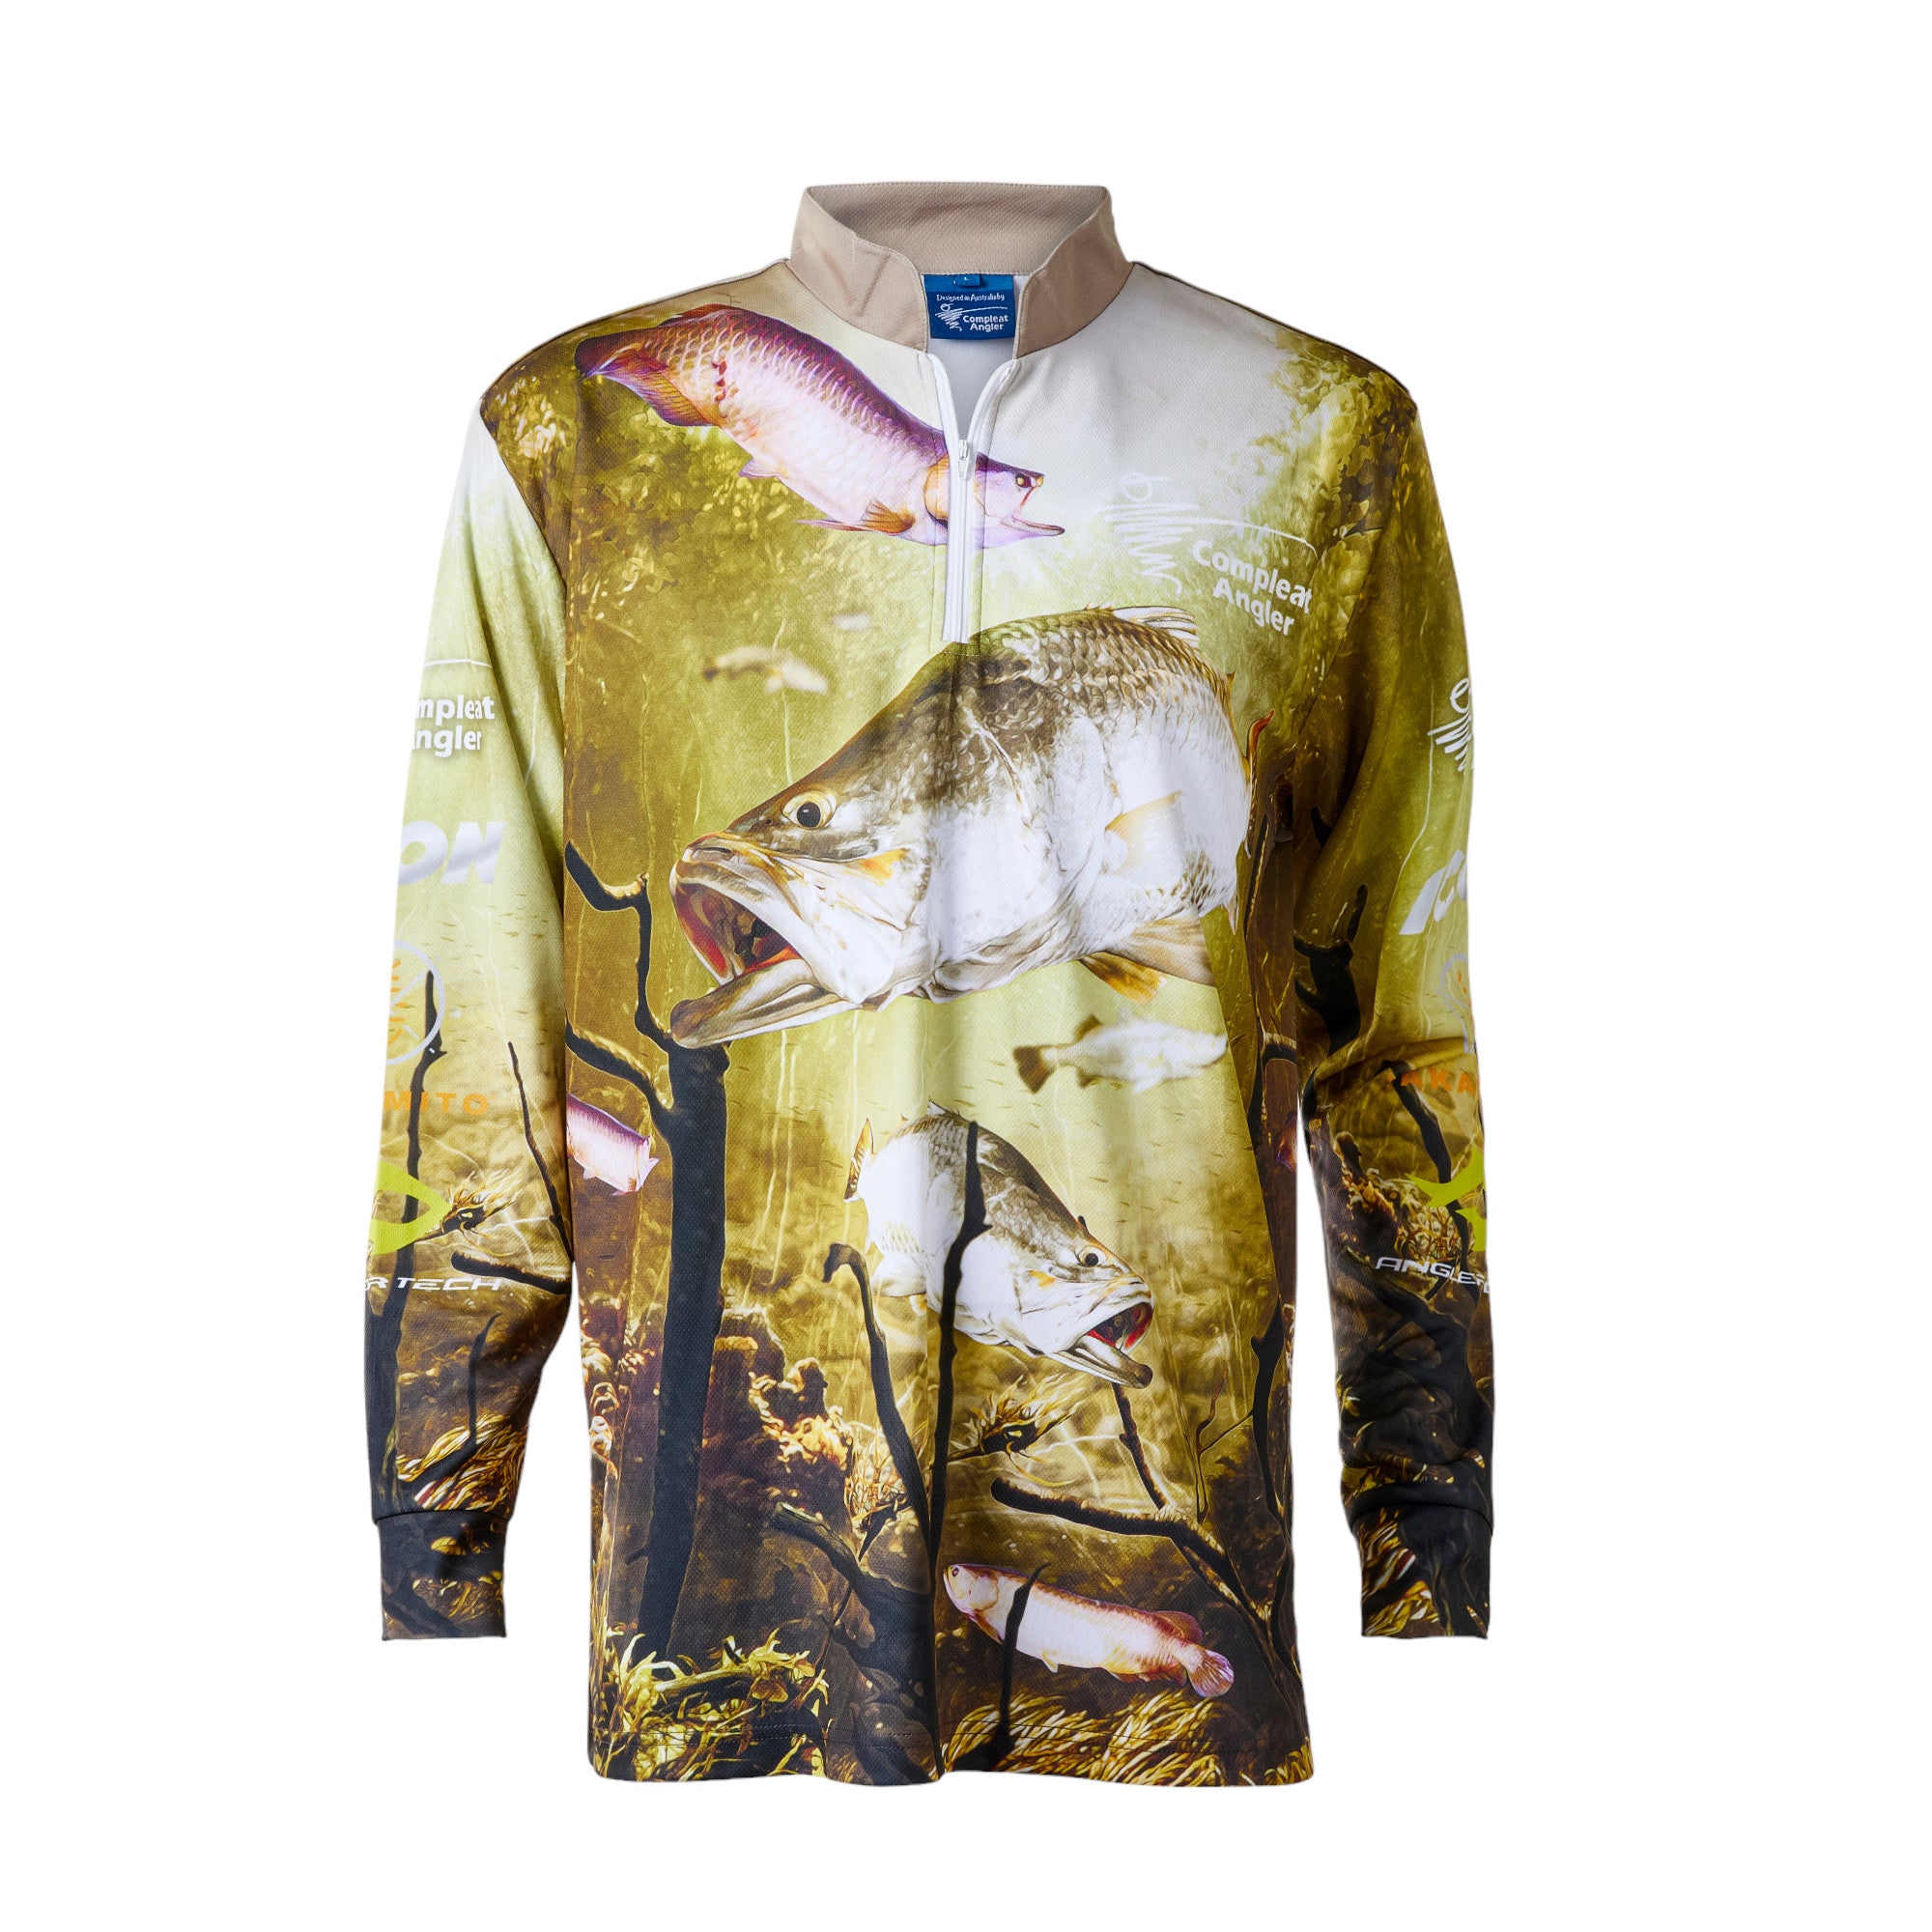 Compleat Angler Wild Side Kids Shirt